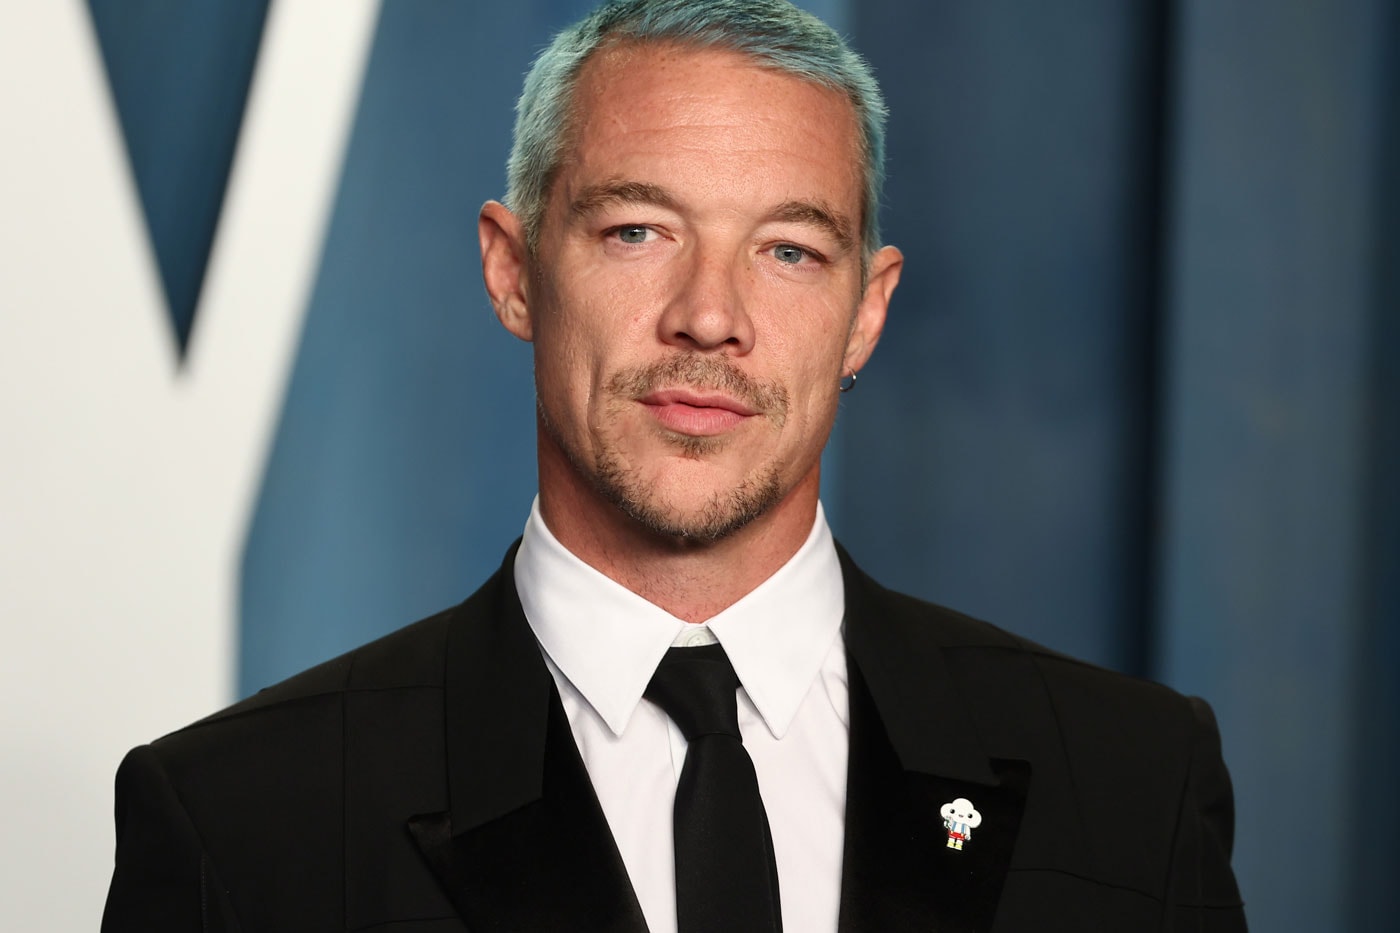 Working With Madonna Had a Huge Impact on Diplo